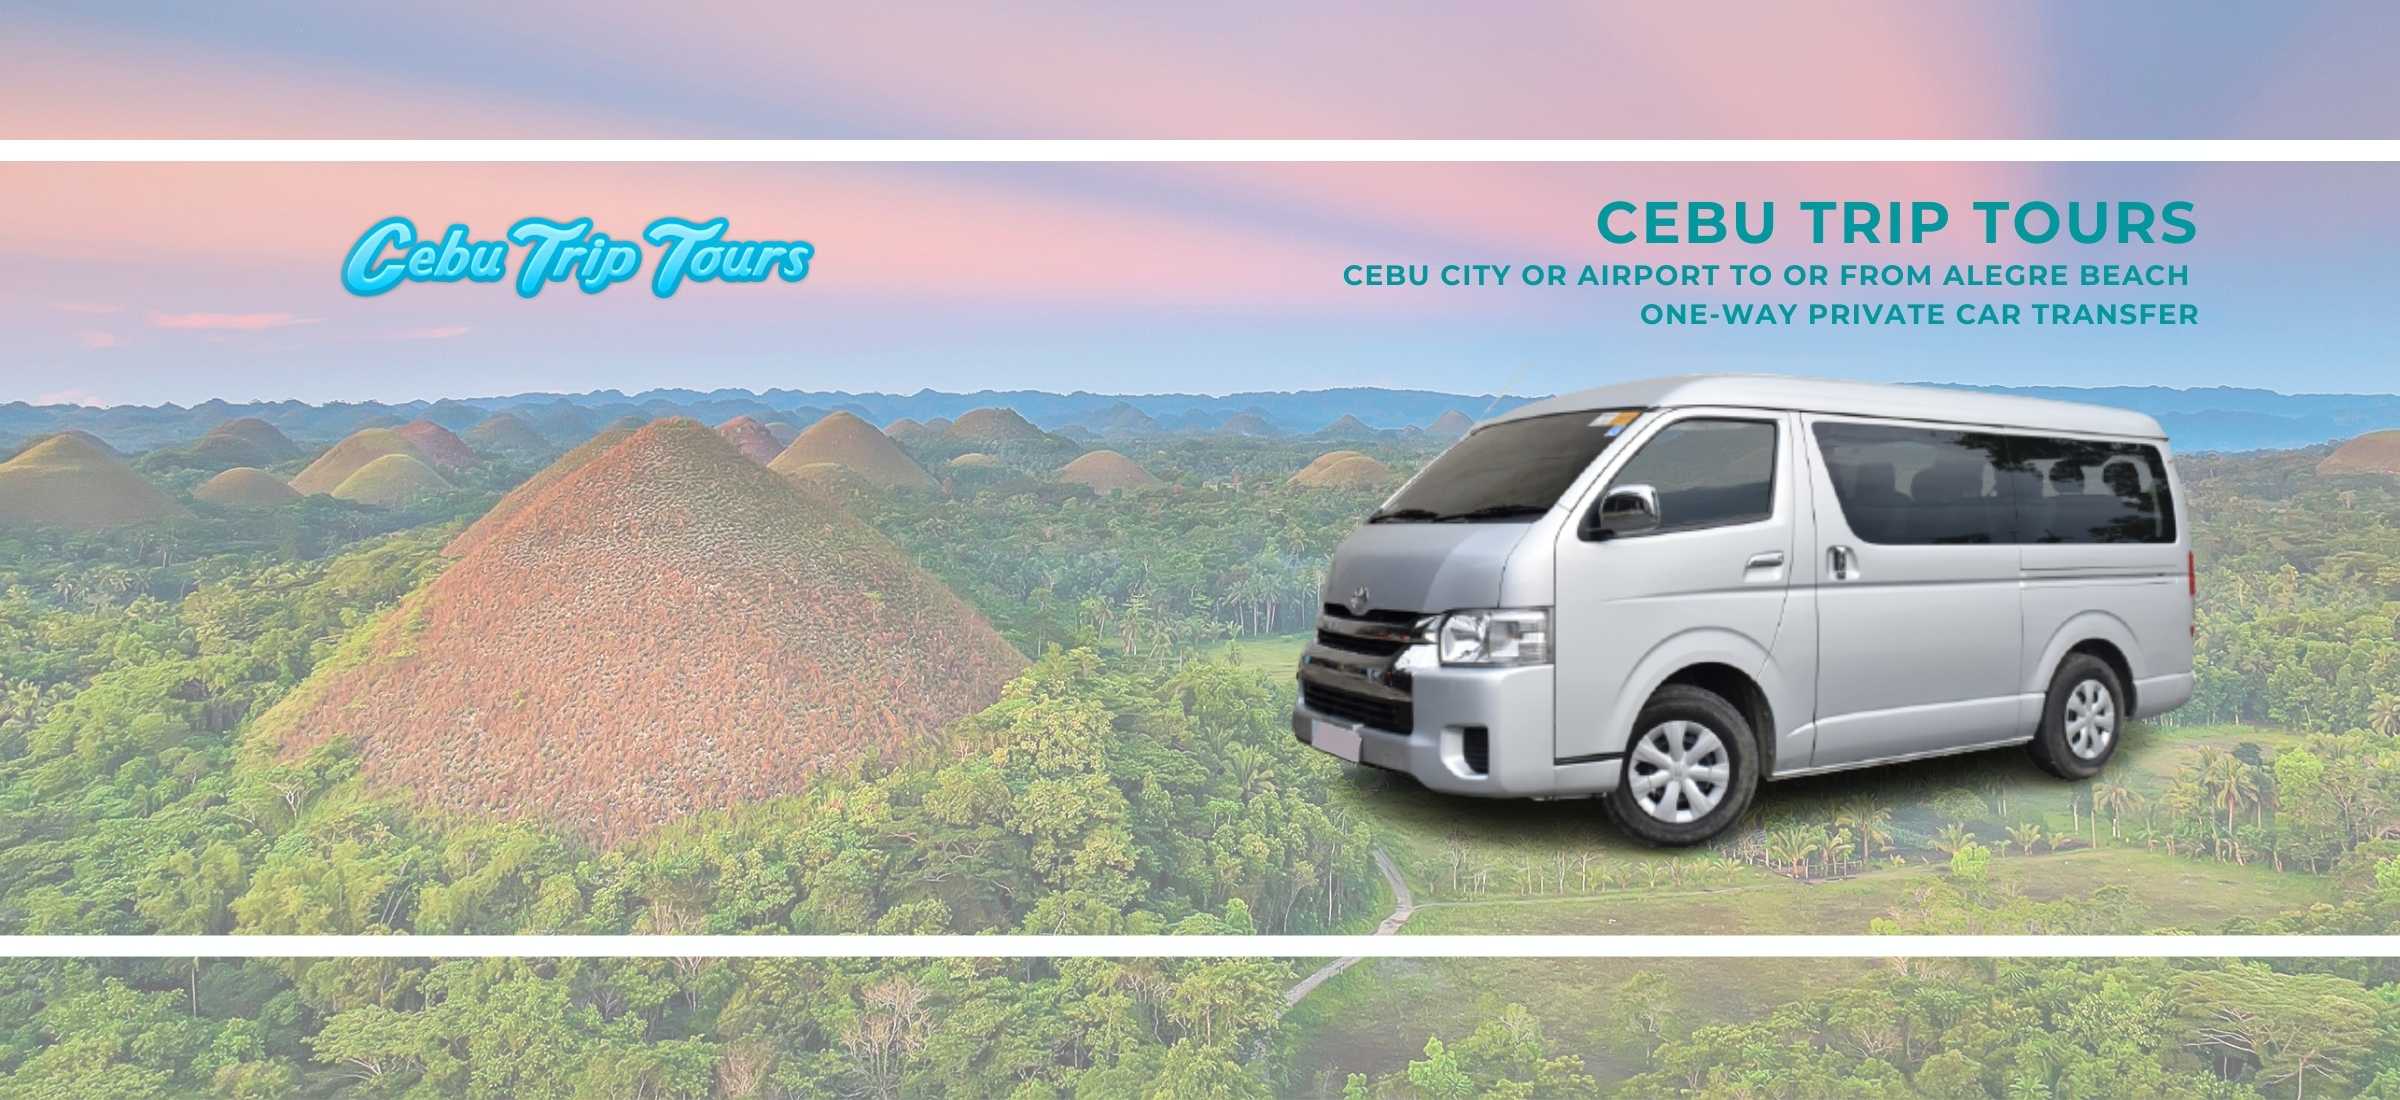 Cebu City or Airport to or from Alegre Beach One-Way Private Car Transfer